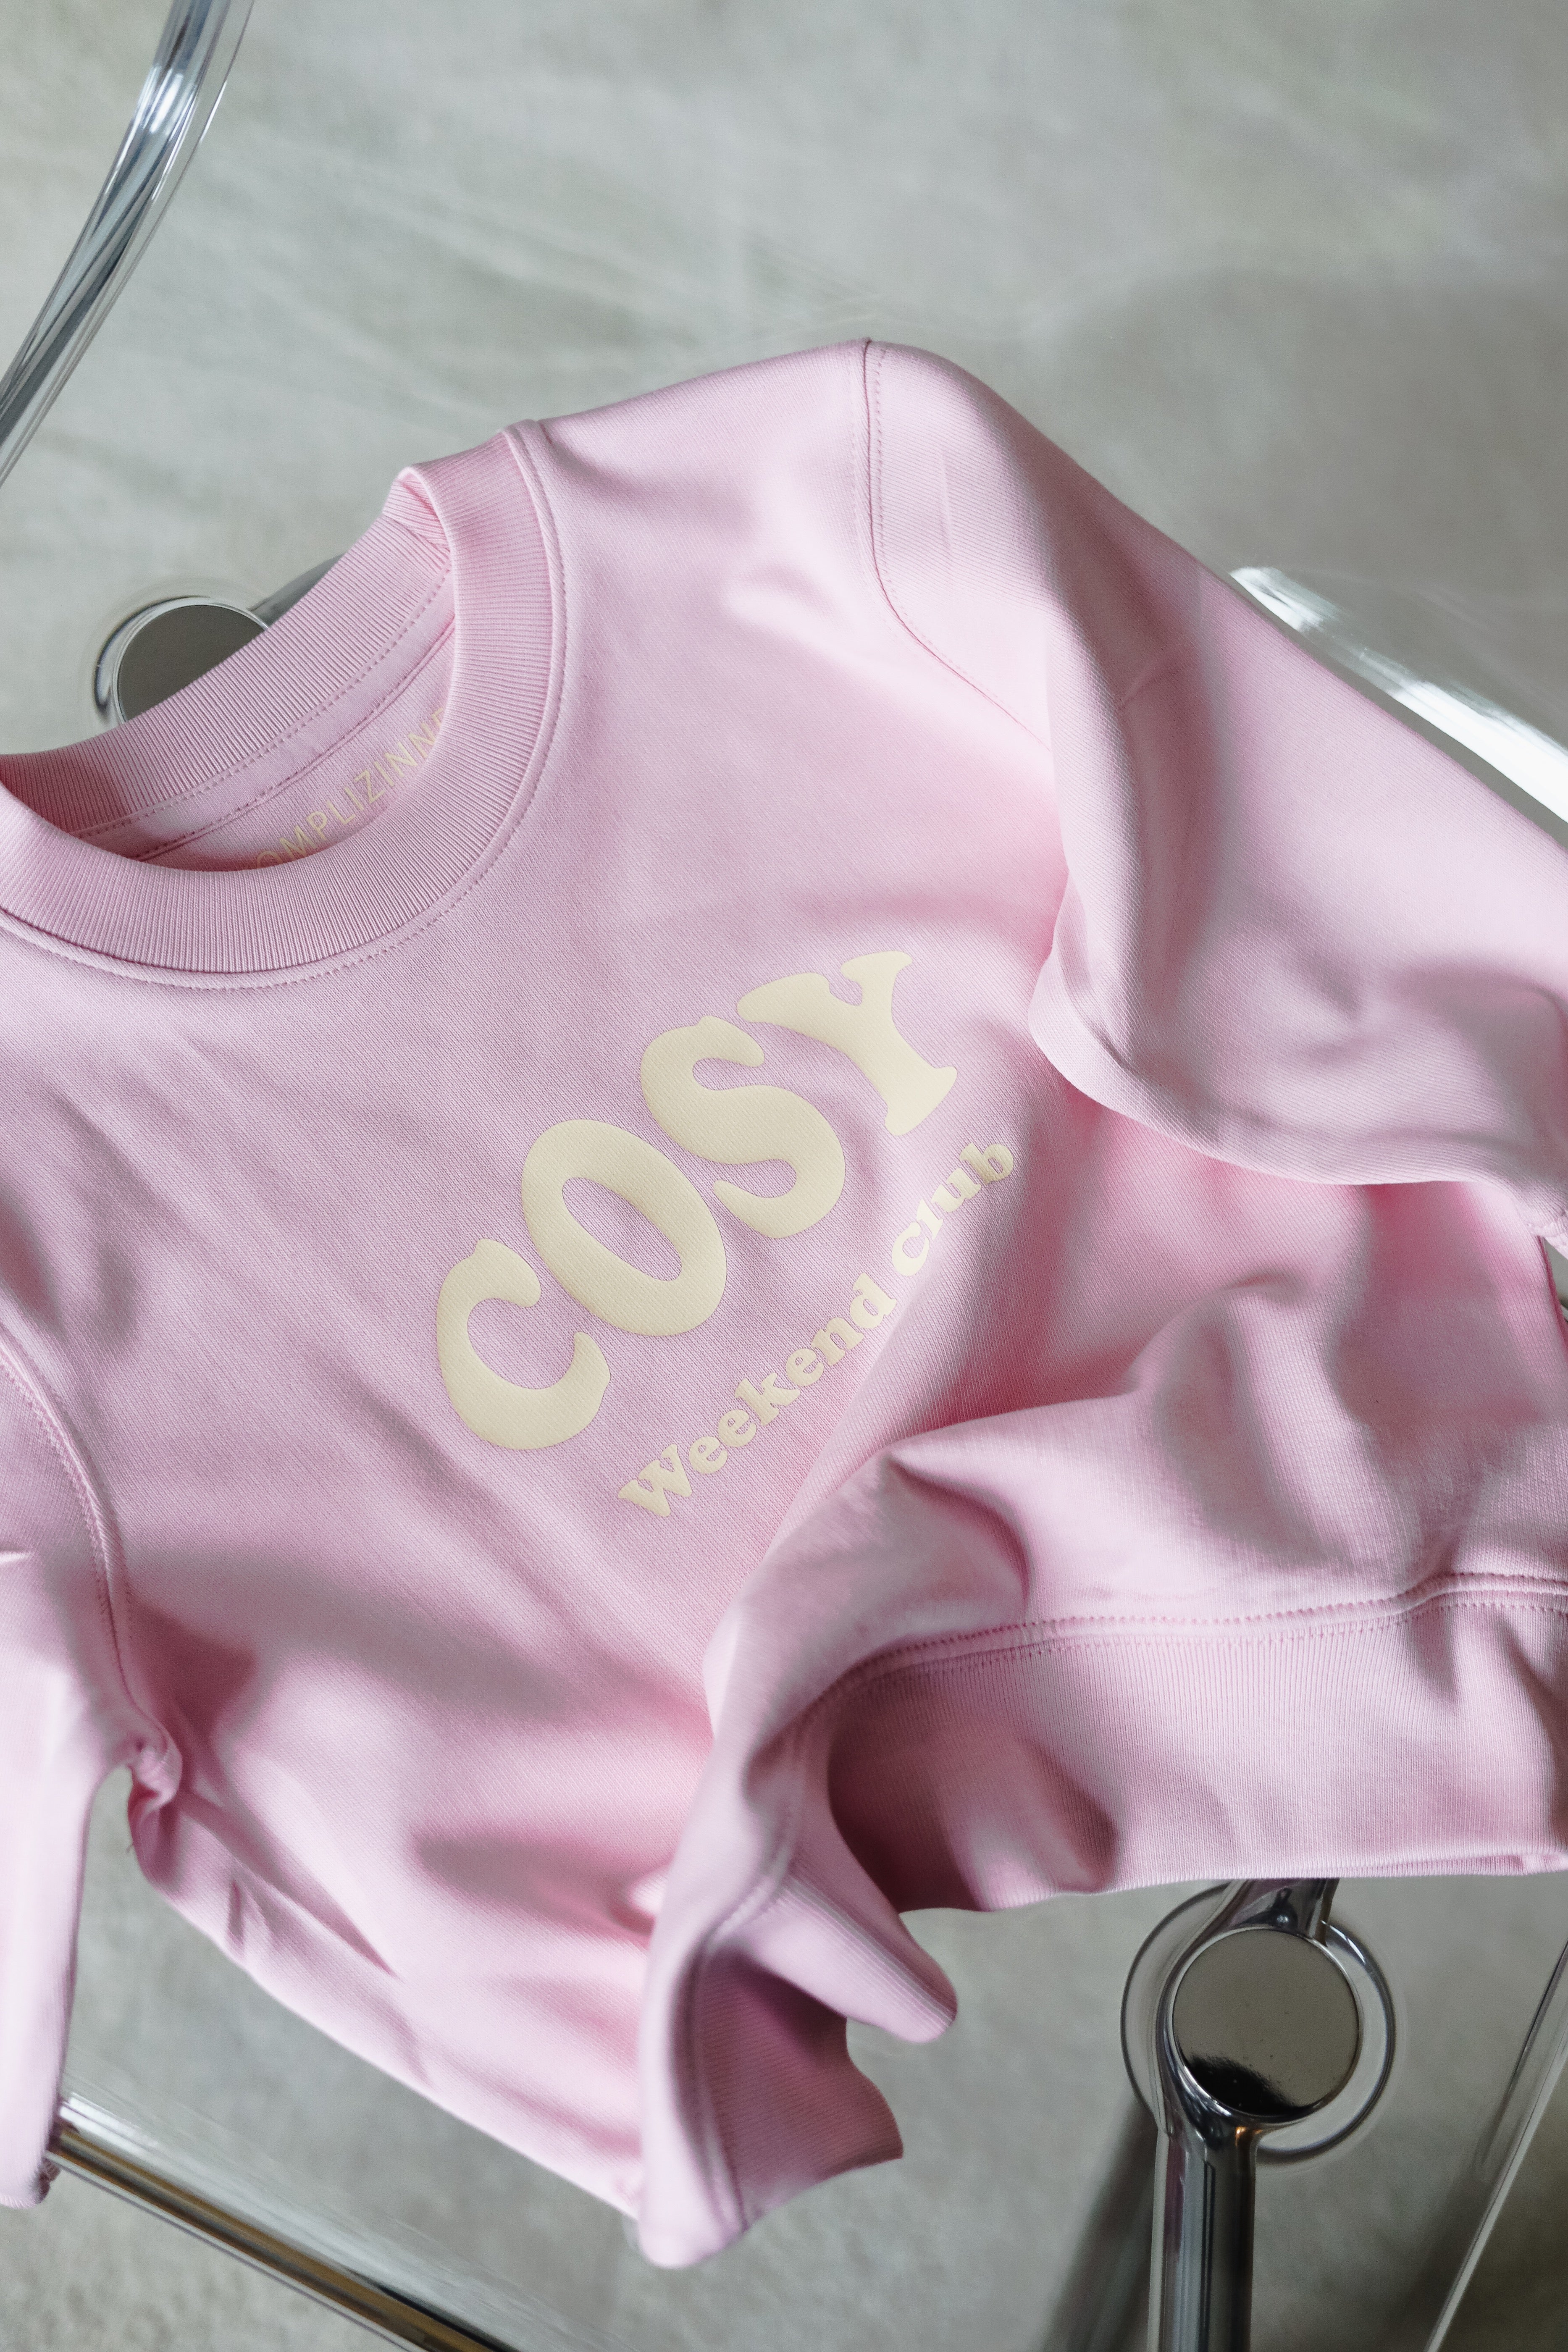 Cosy Sweater Kids pink